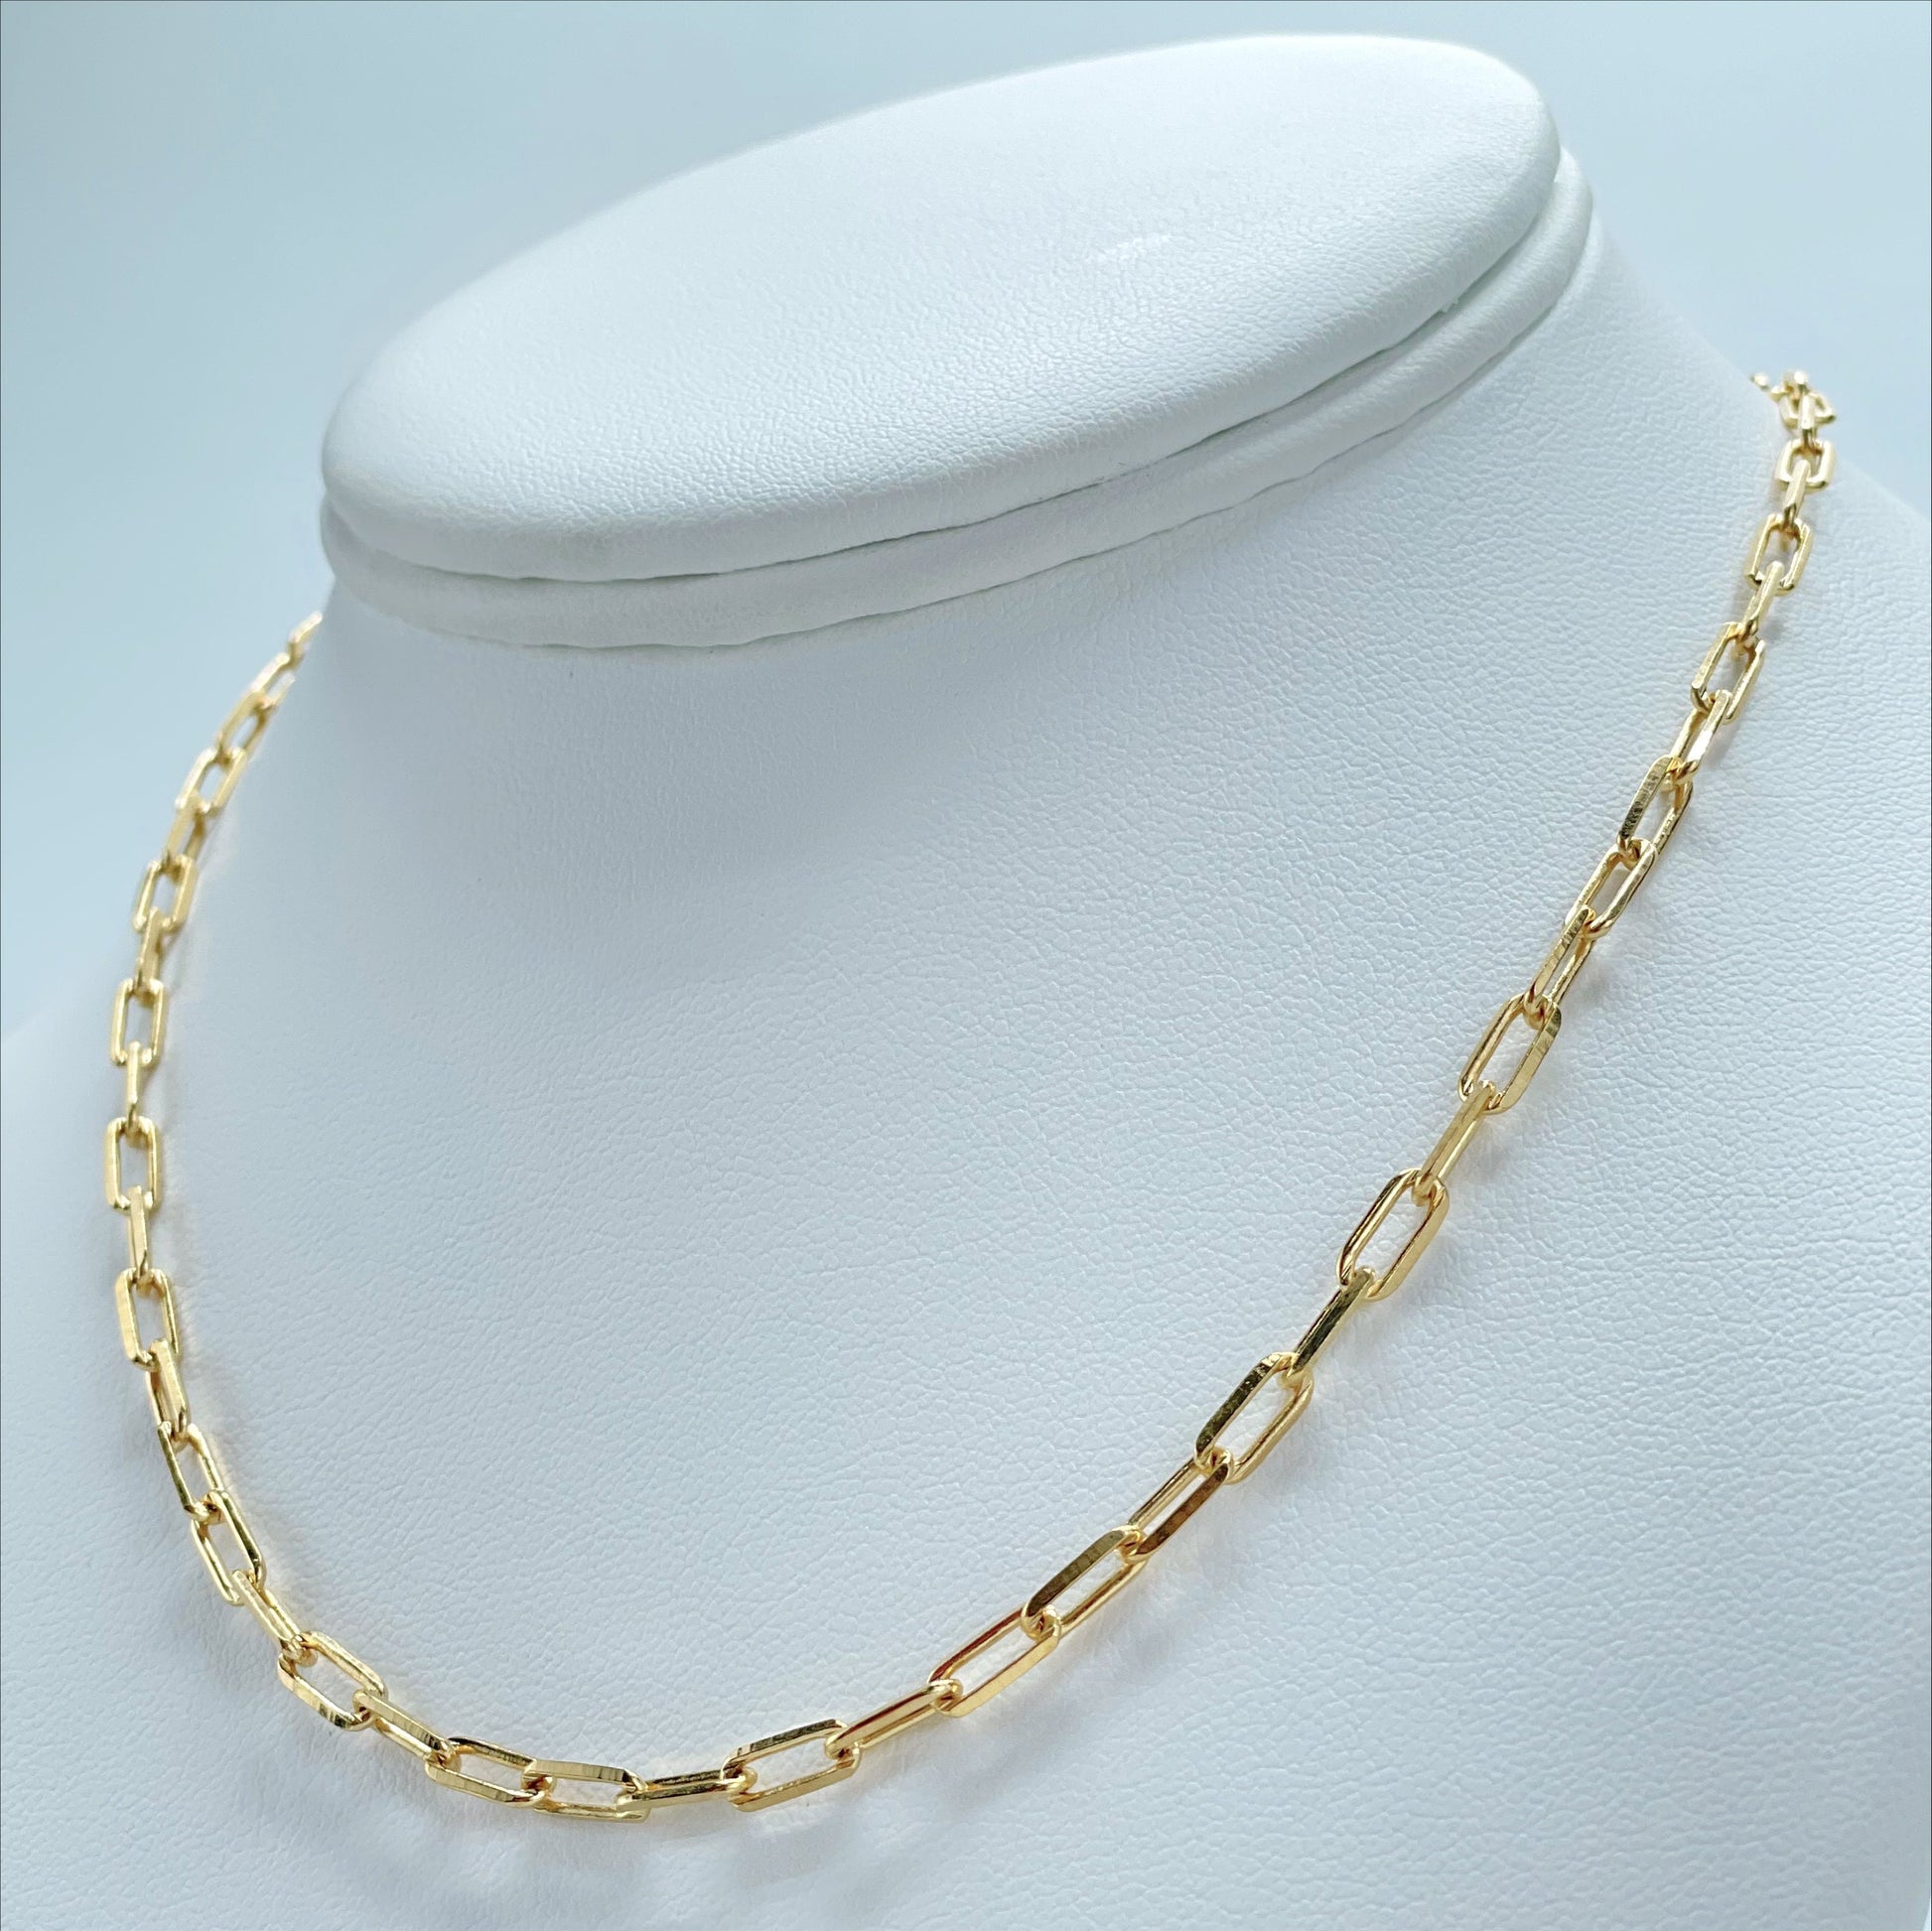 18k Gold Filled 3.5mm Paperclip Link Chain 20 inches Necklace Wholesale Jewelry Supplies